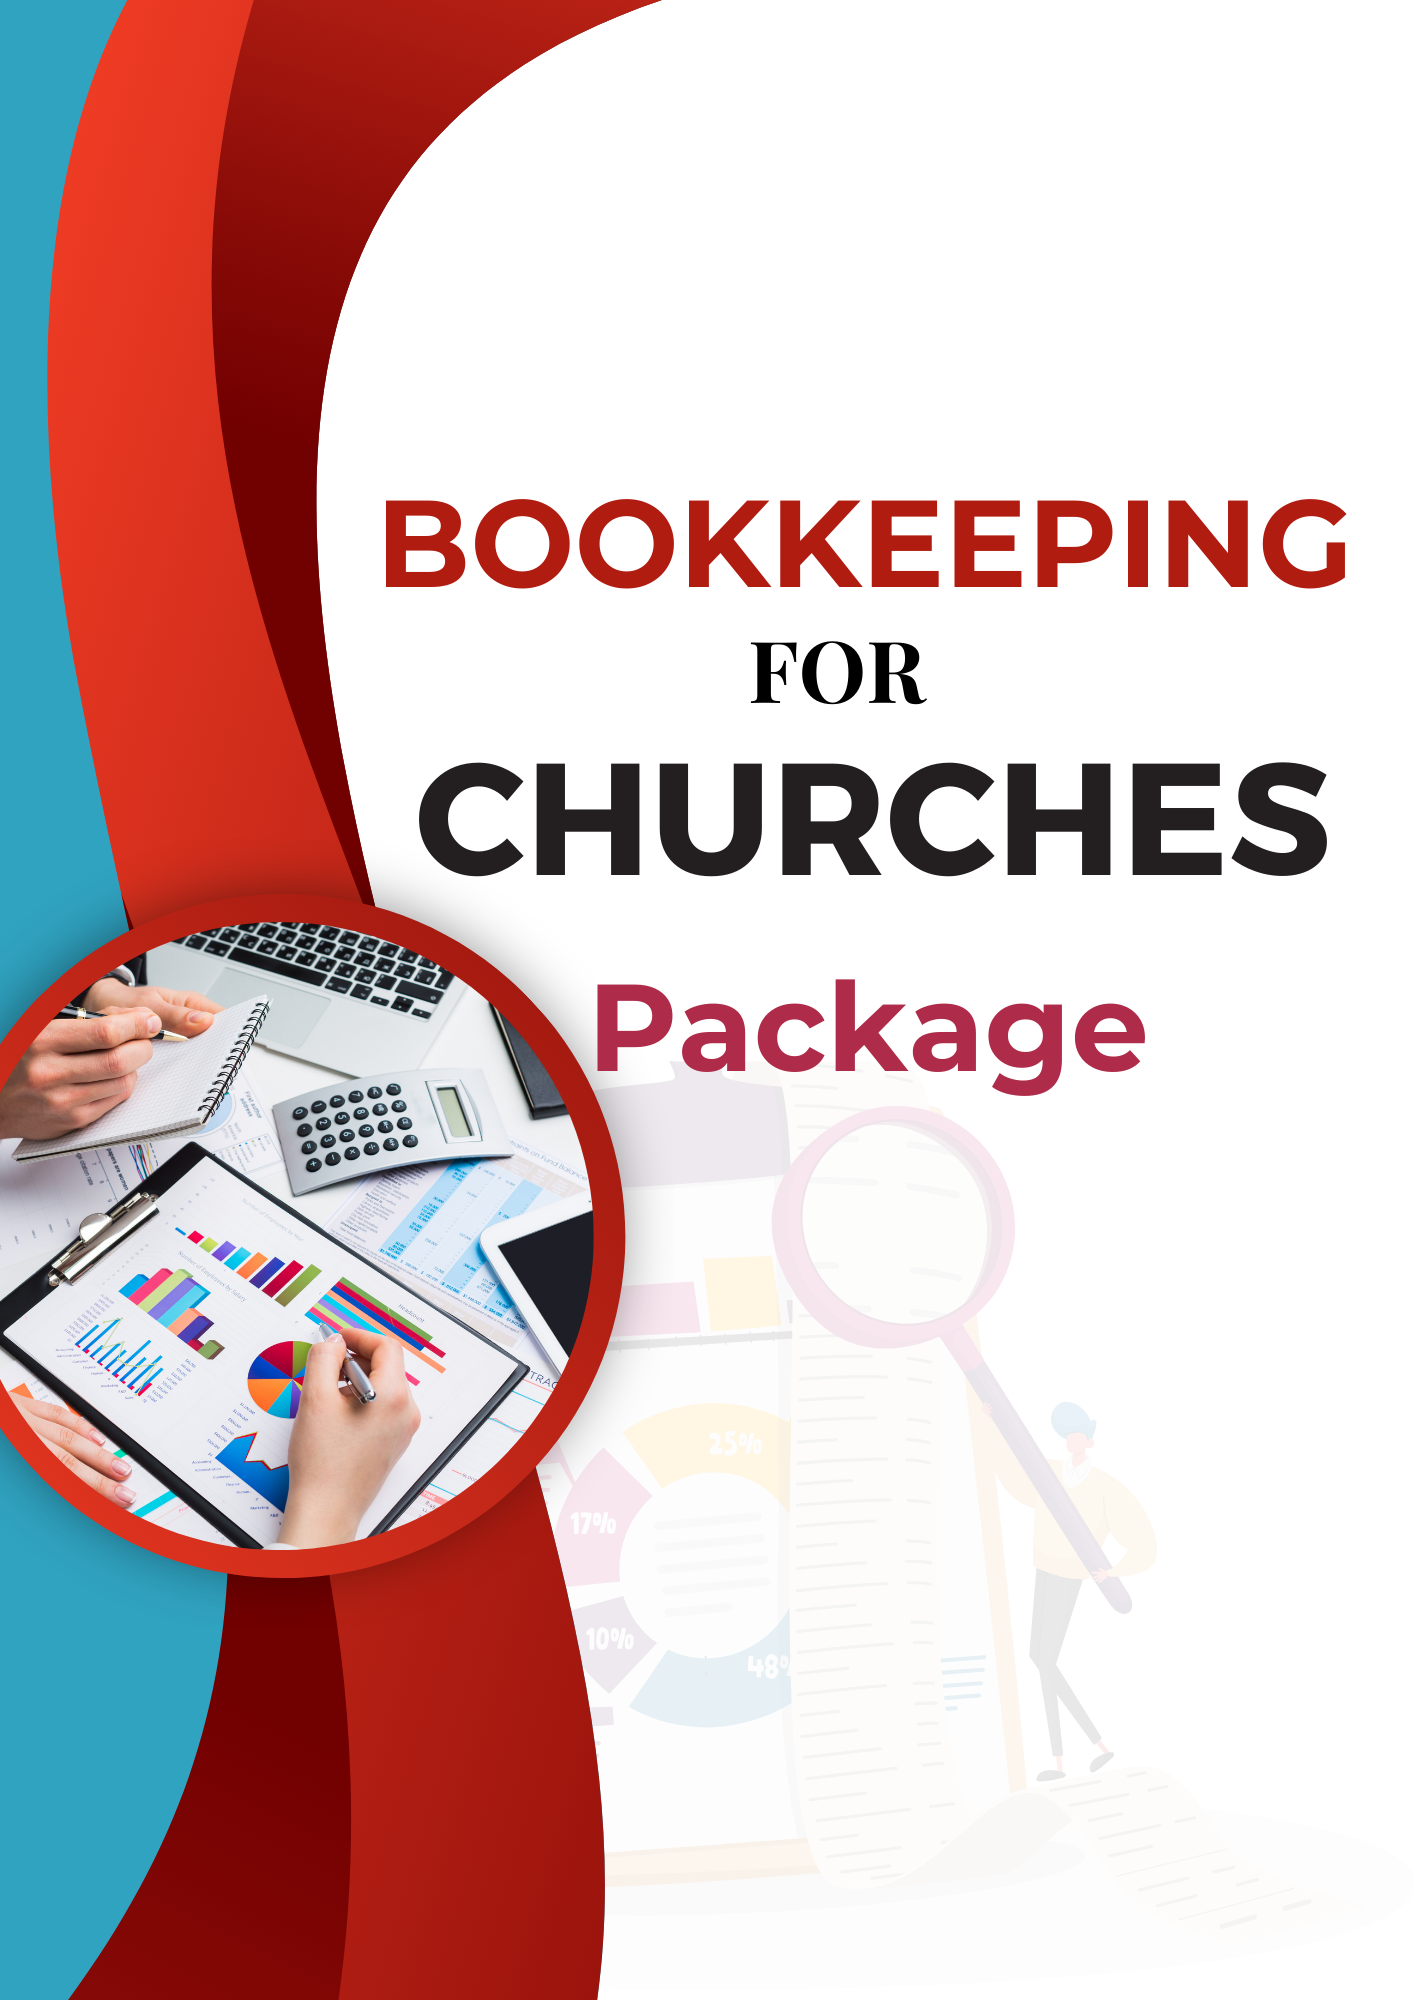 Bookkeeping for Churches Package